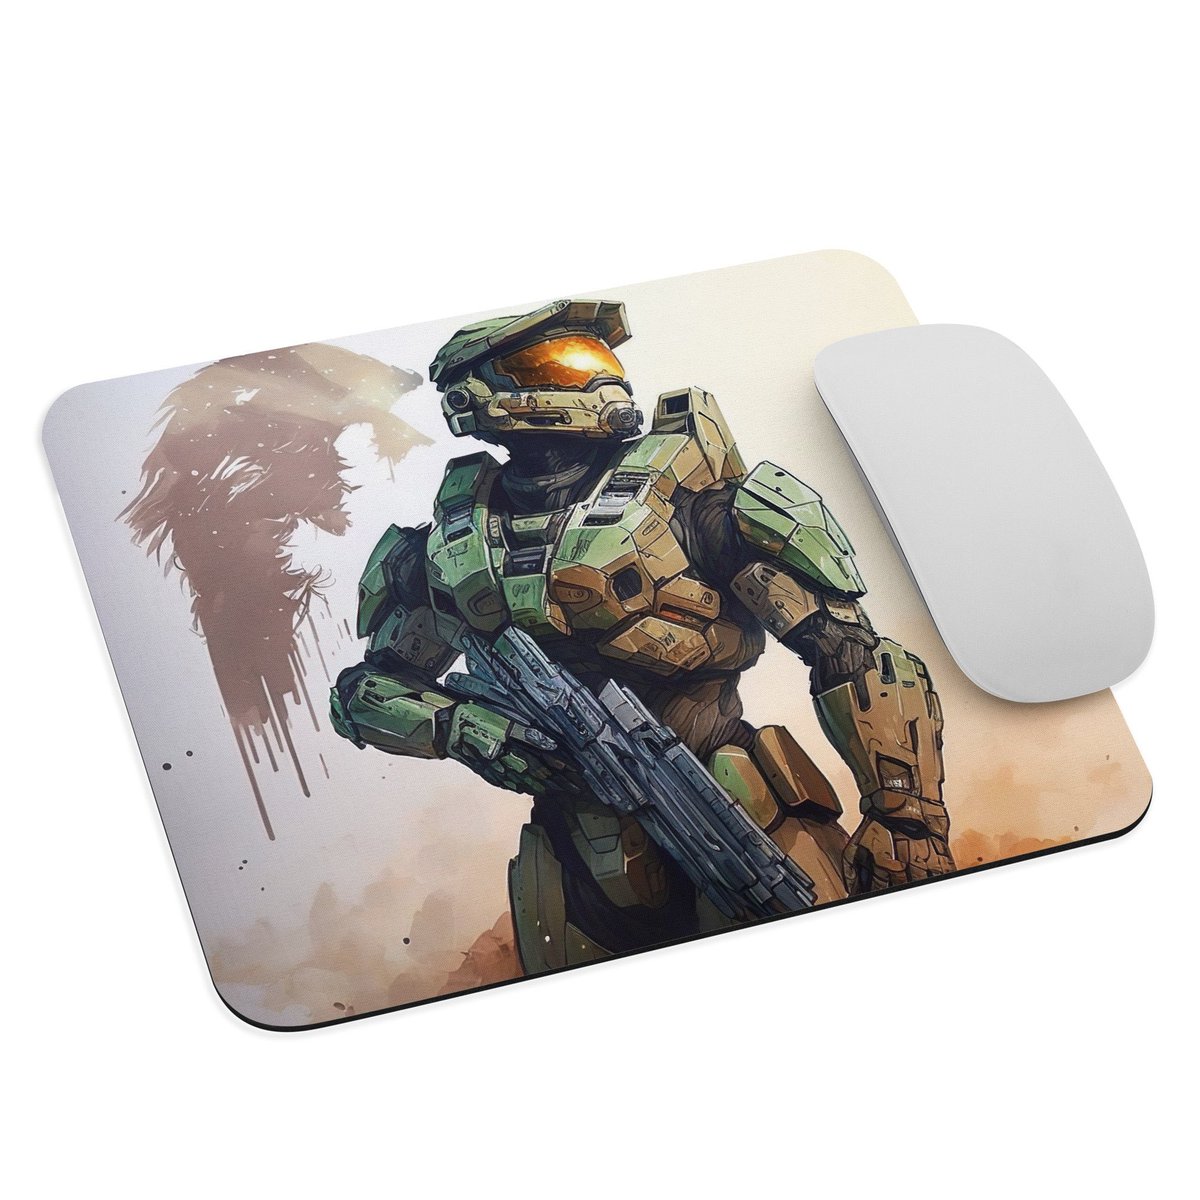 Excited to share the latest addition to my #etsy shop: Space Marine - Mouse pad #gamingmousepad #spacemarine #mousepad #scifimousepad #deskaccessory #officesupplies #giftidea #decorativemousepad #computeraccessories etsy.me/3ZpXeFT